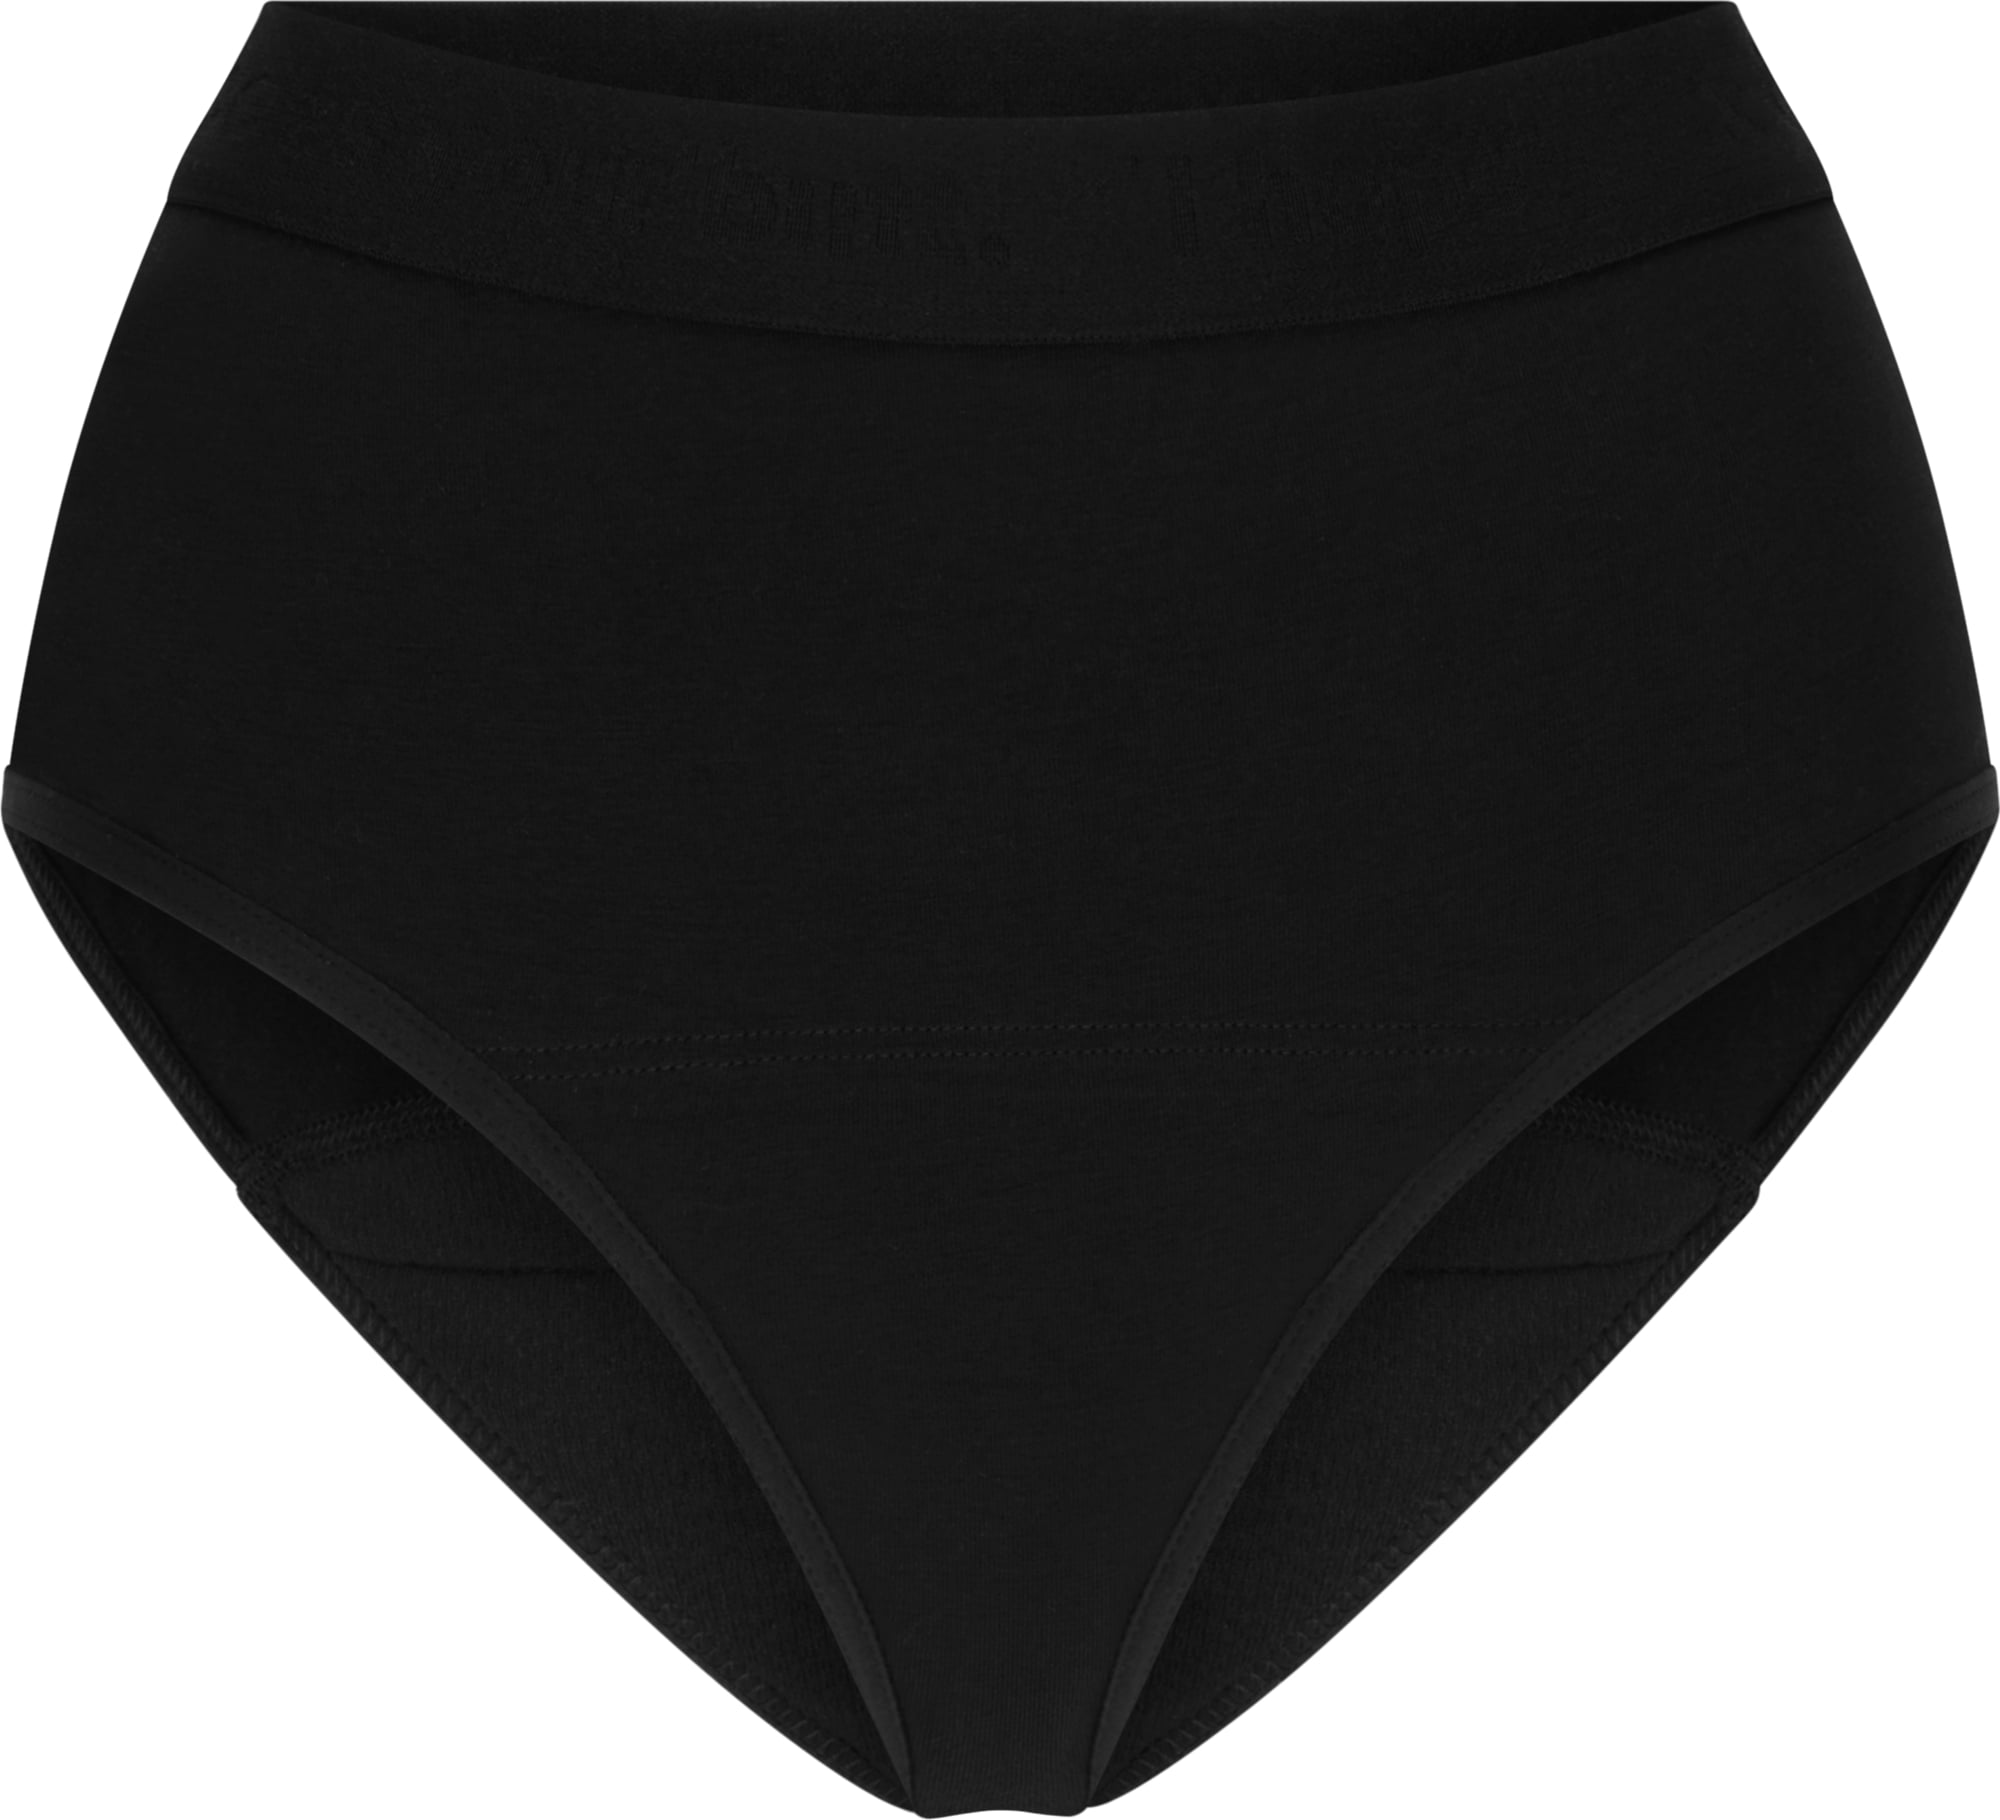 The Female Company Period Underwear - Hipster Basic Black Extra